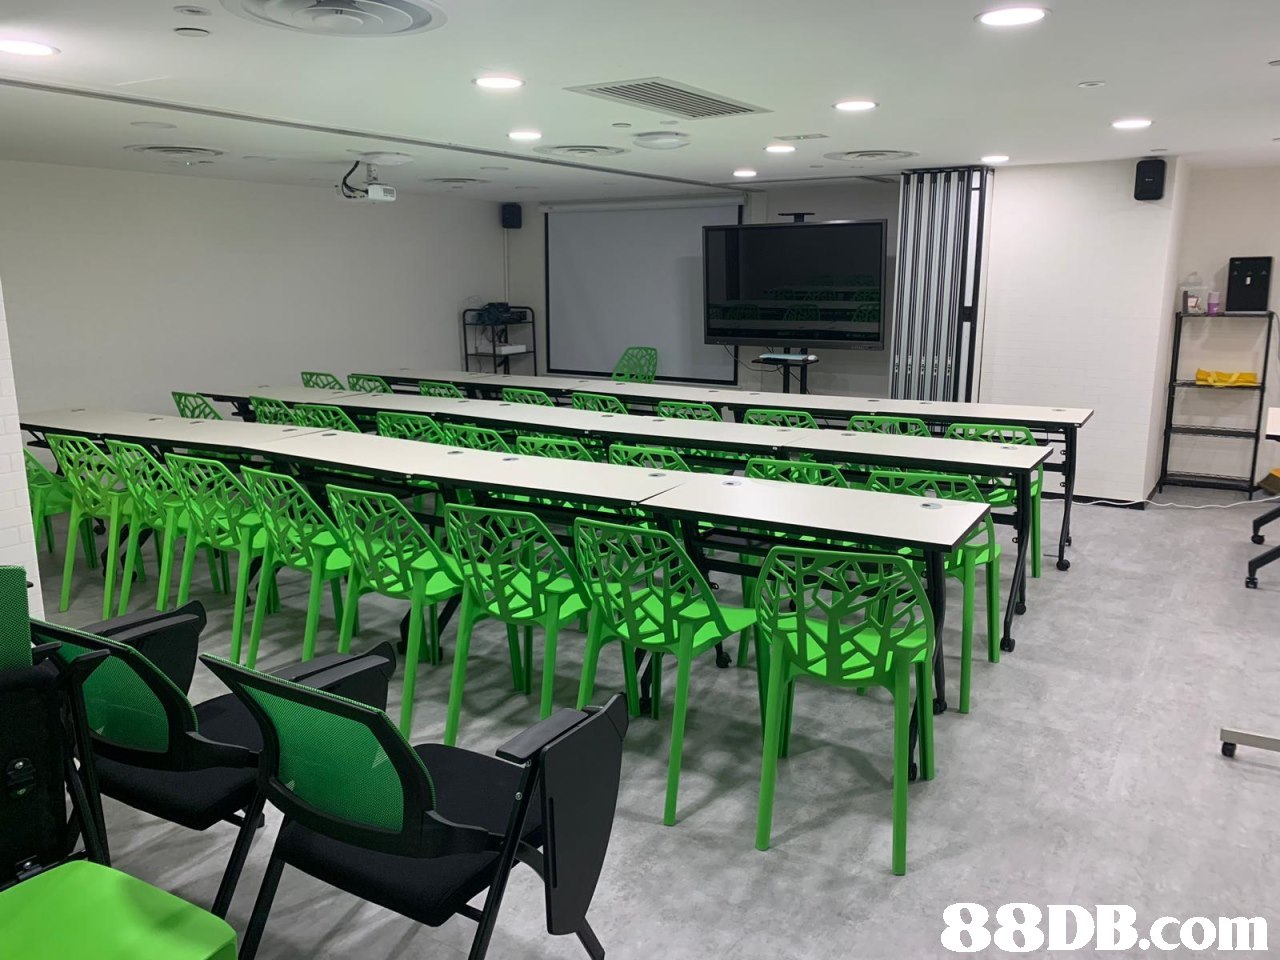   conference hall,table,auditorium,classroom,